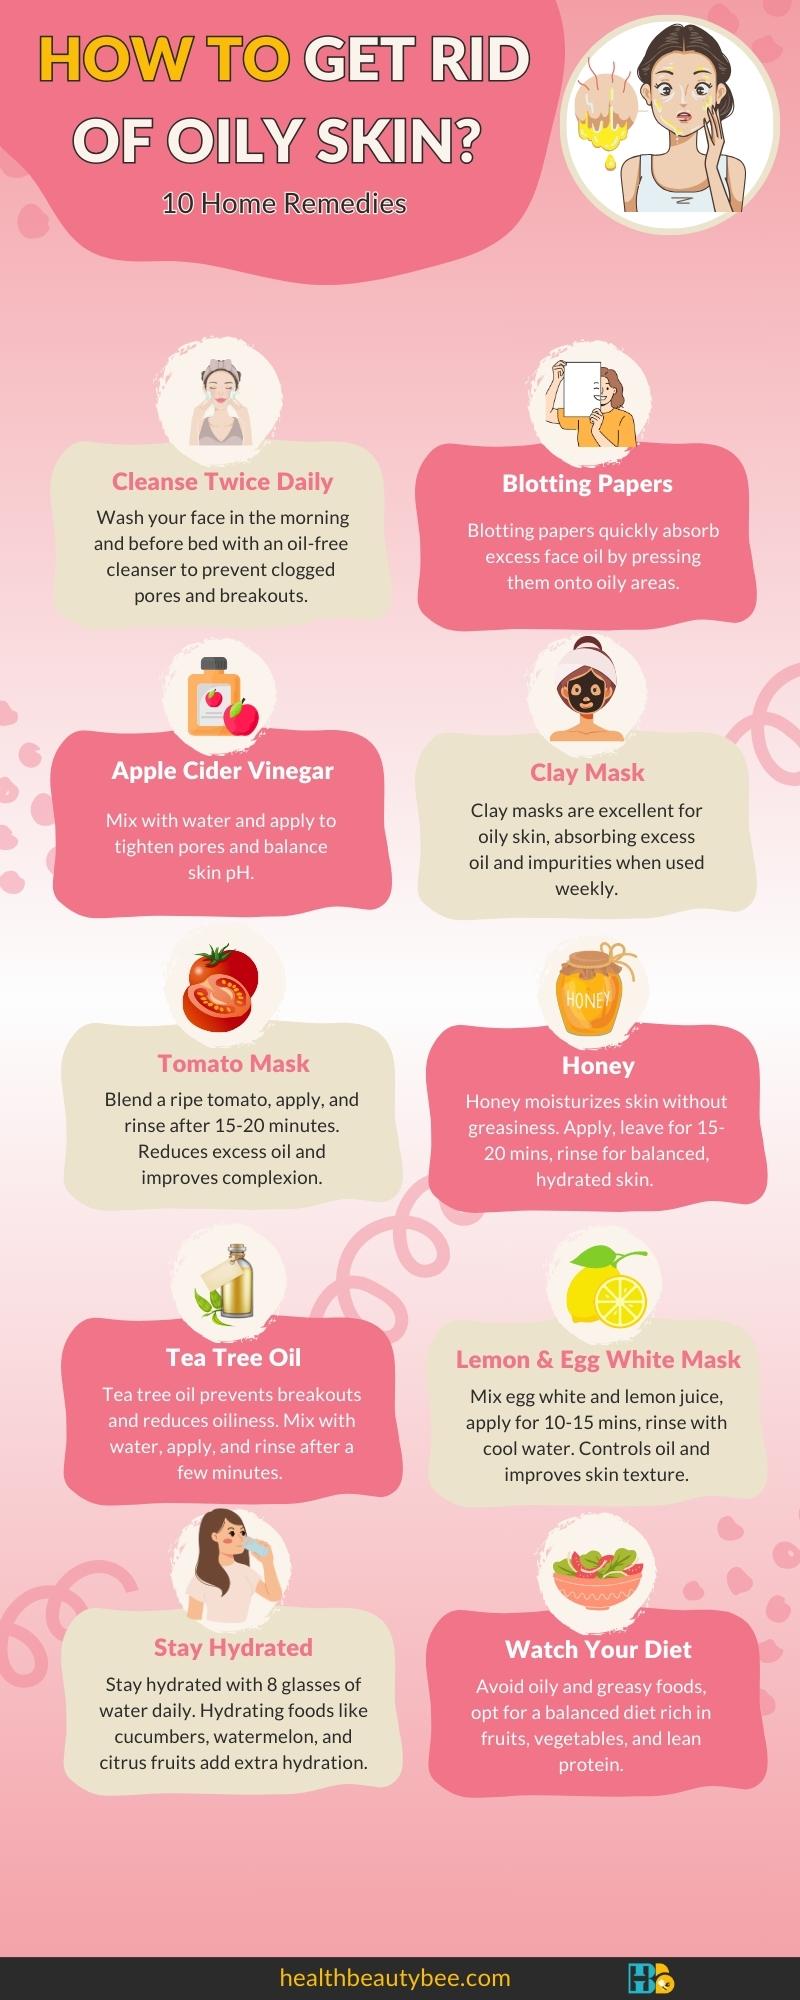 How to Get Rid of Oily Skin Home Remedies to Control Oily Face infographic healthbeautybee